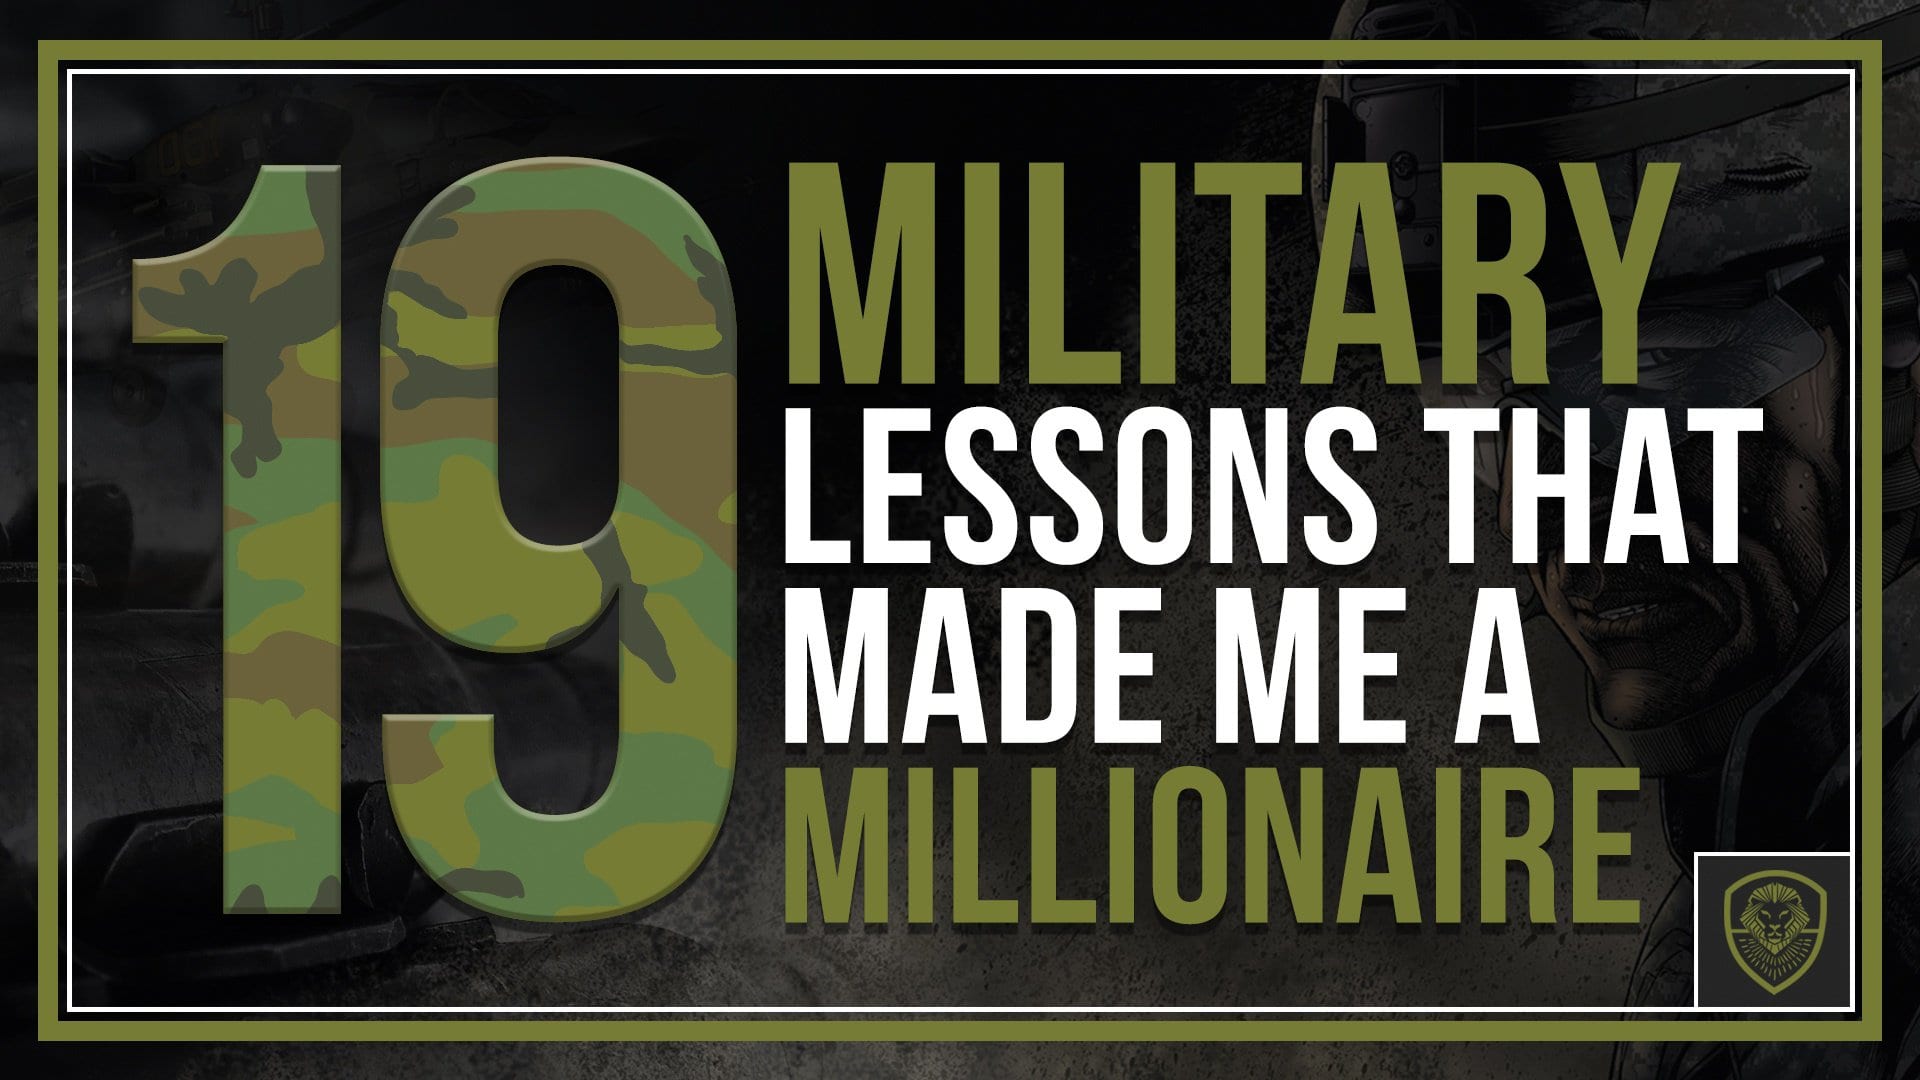 19-military-lessons-that-made-me-a-millionaire